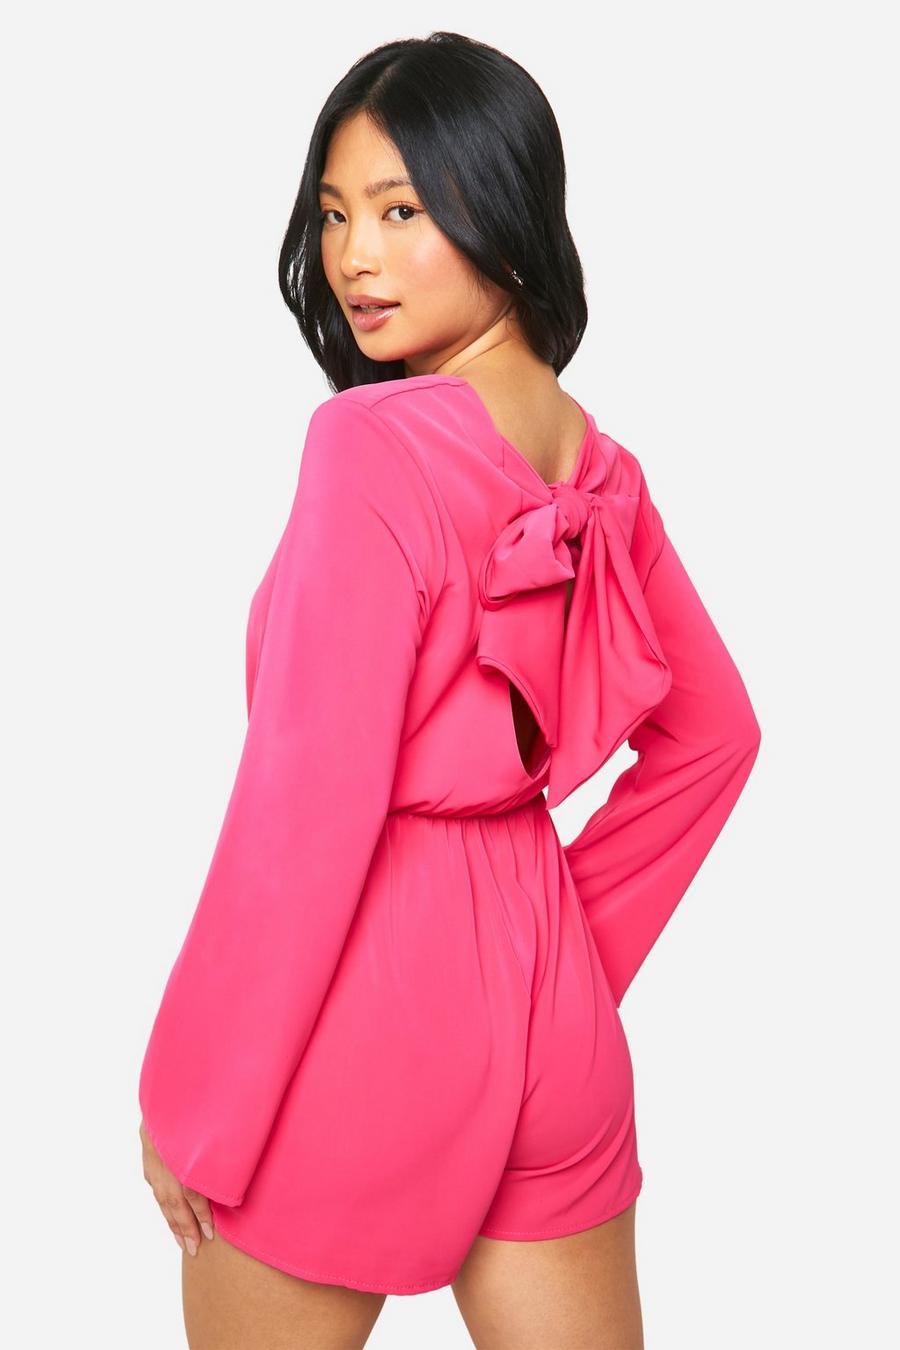 Petite Bow Detail Open Back Playsuit, Hot pink